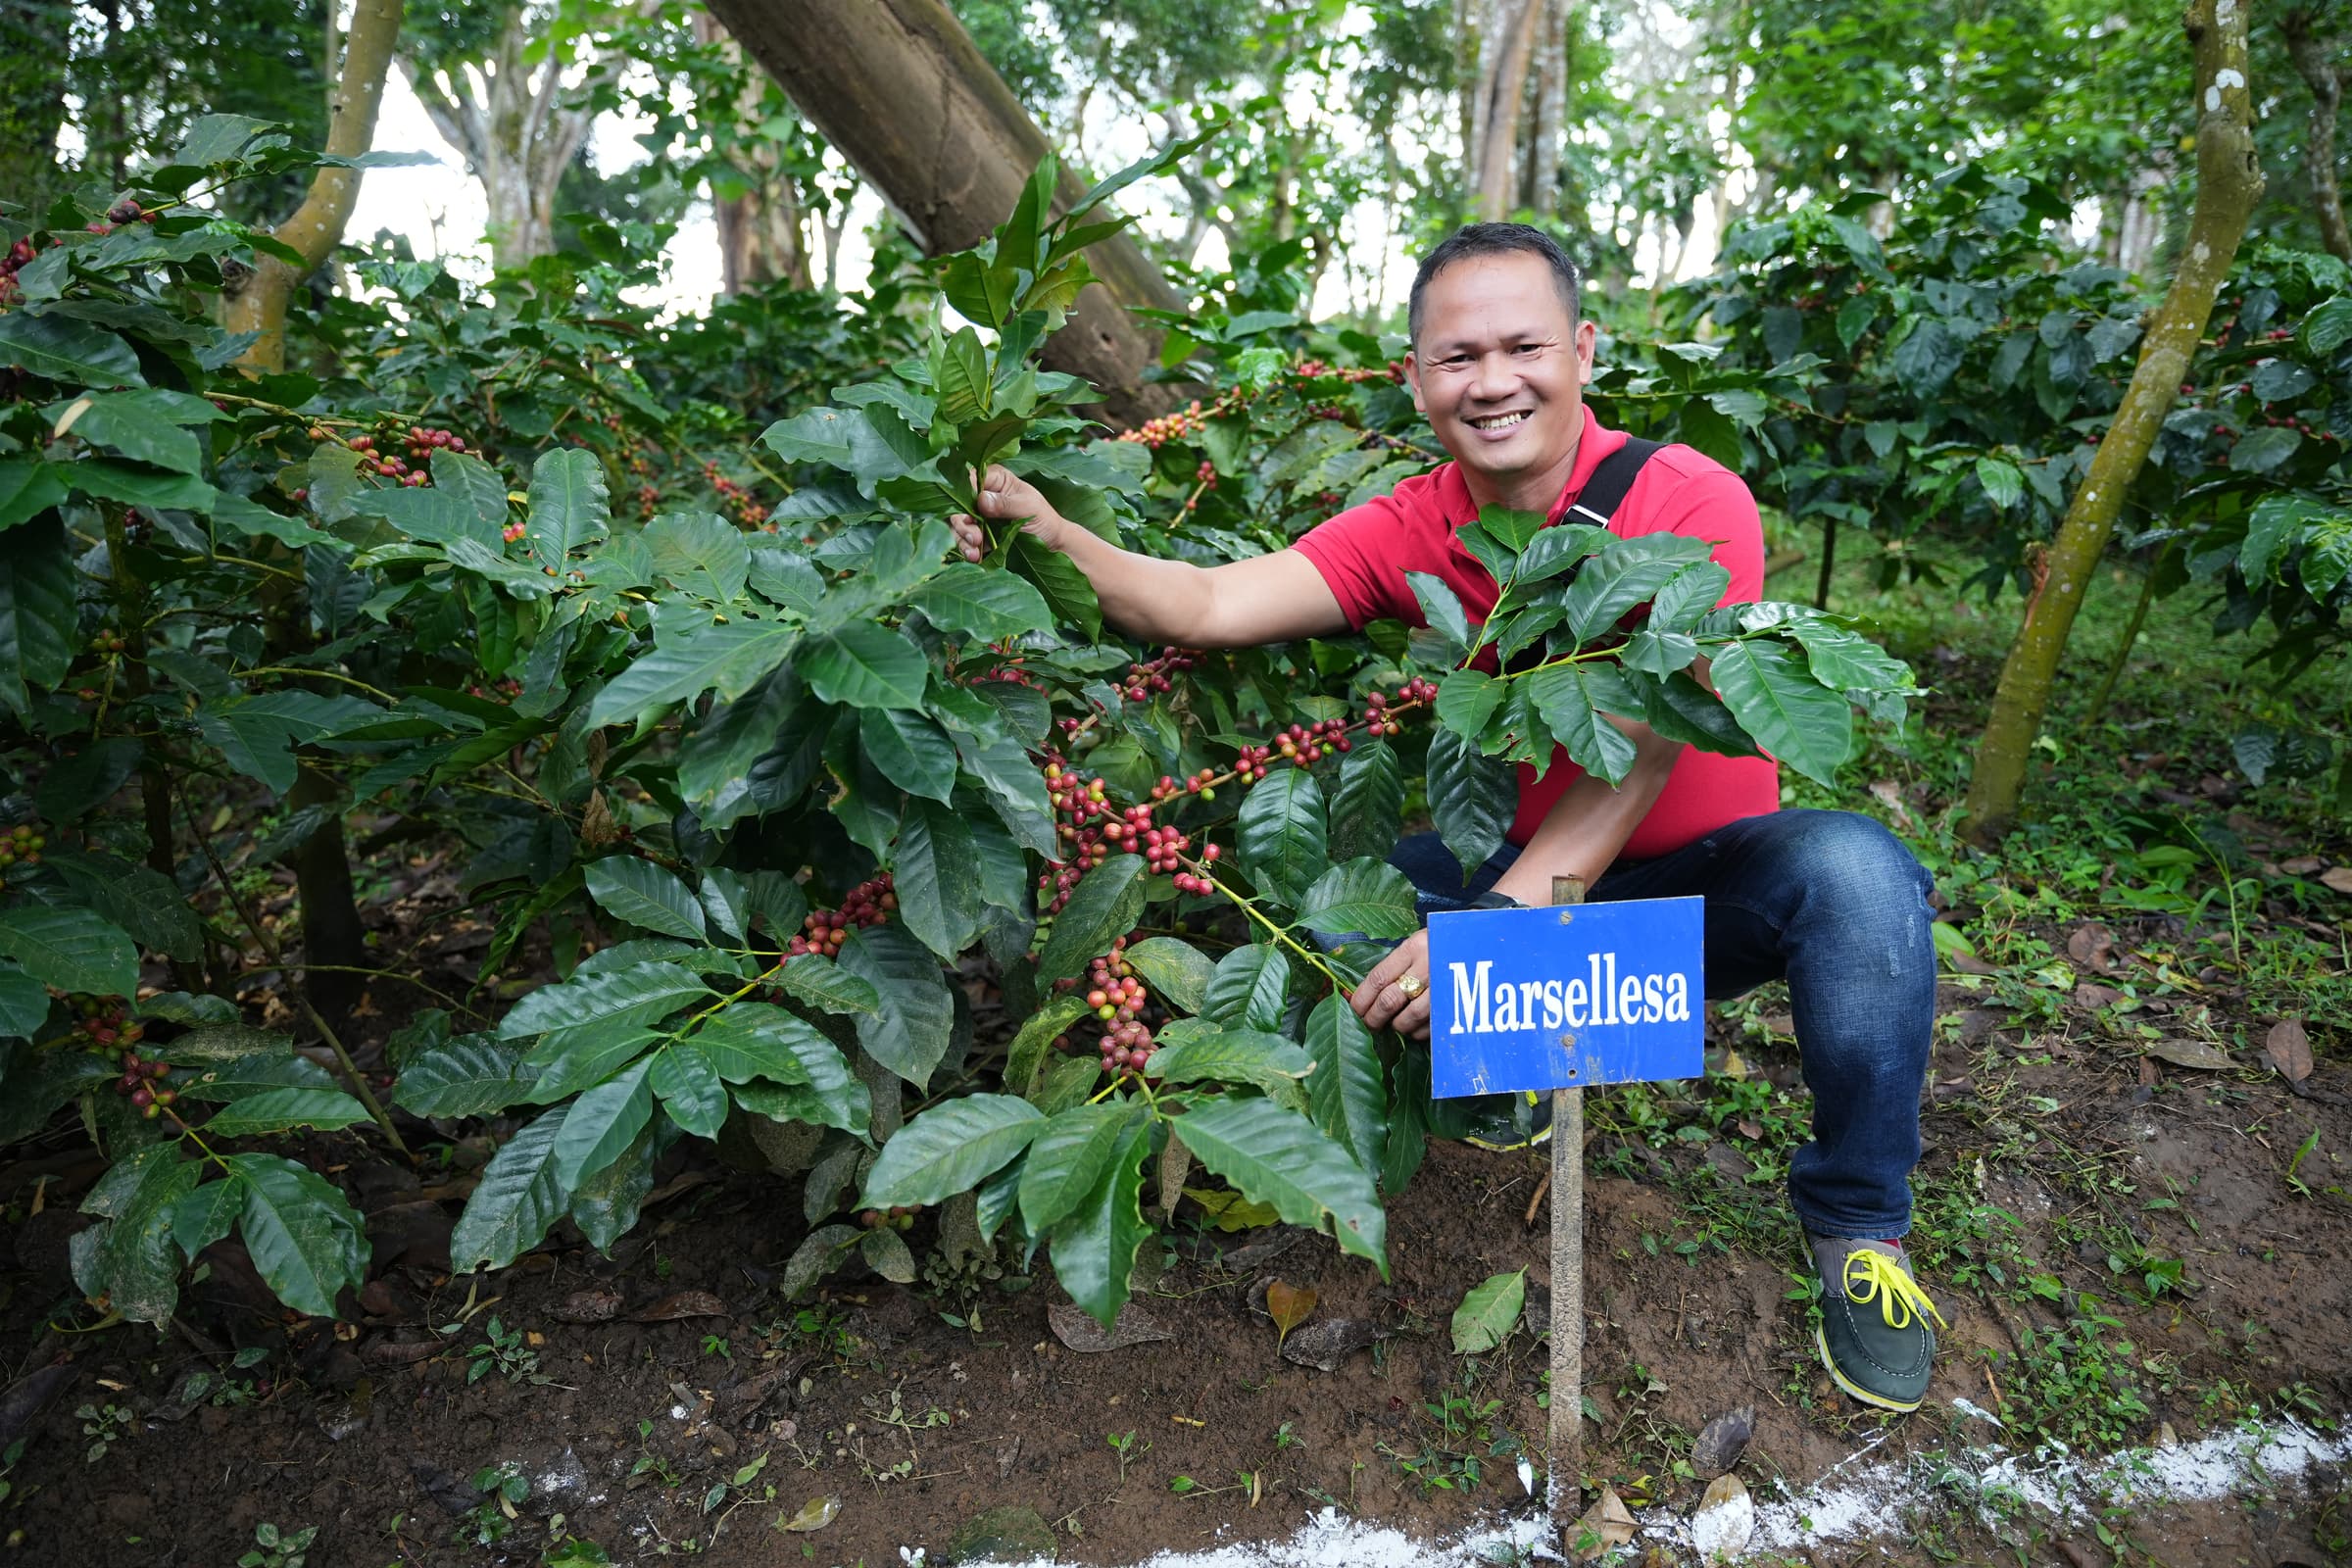 Allan Datu-Imam, a PhilCAFE technical advisor, poses in front of the variety Marsellesa at the Central Coffee Research Institute’s IMLVT plot site in Balehonnur, Karnataka, India.